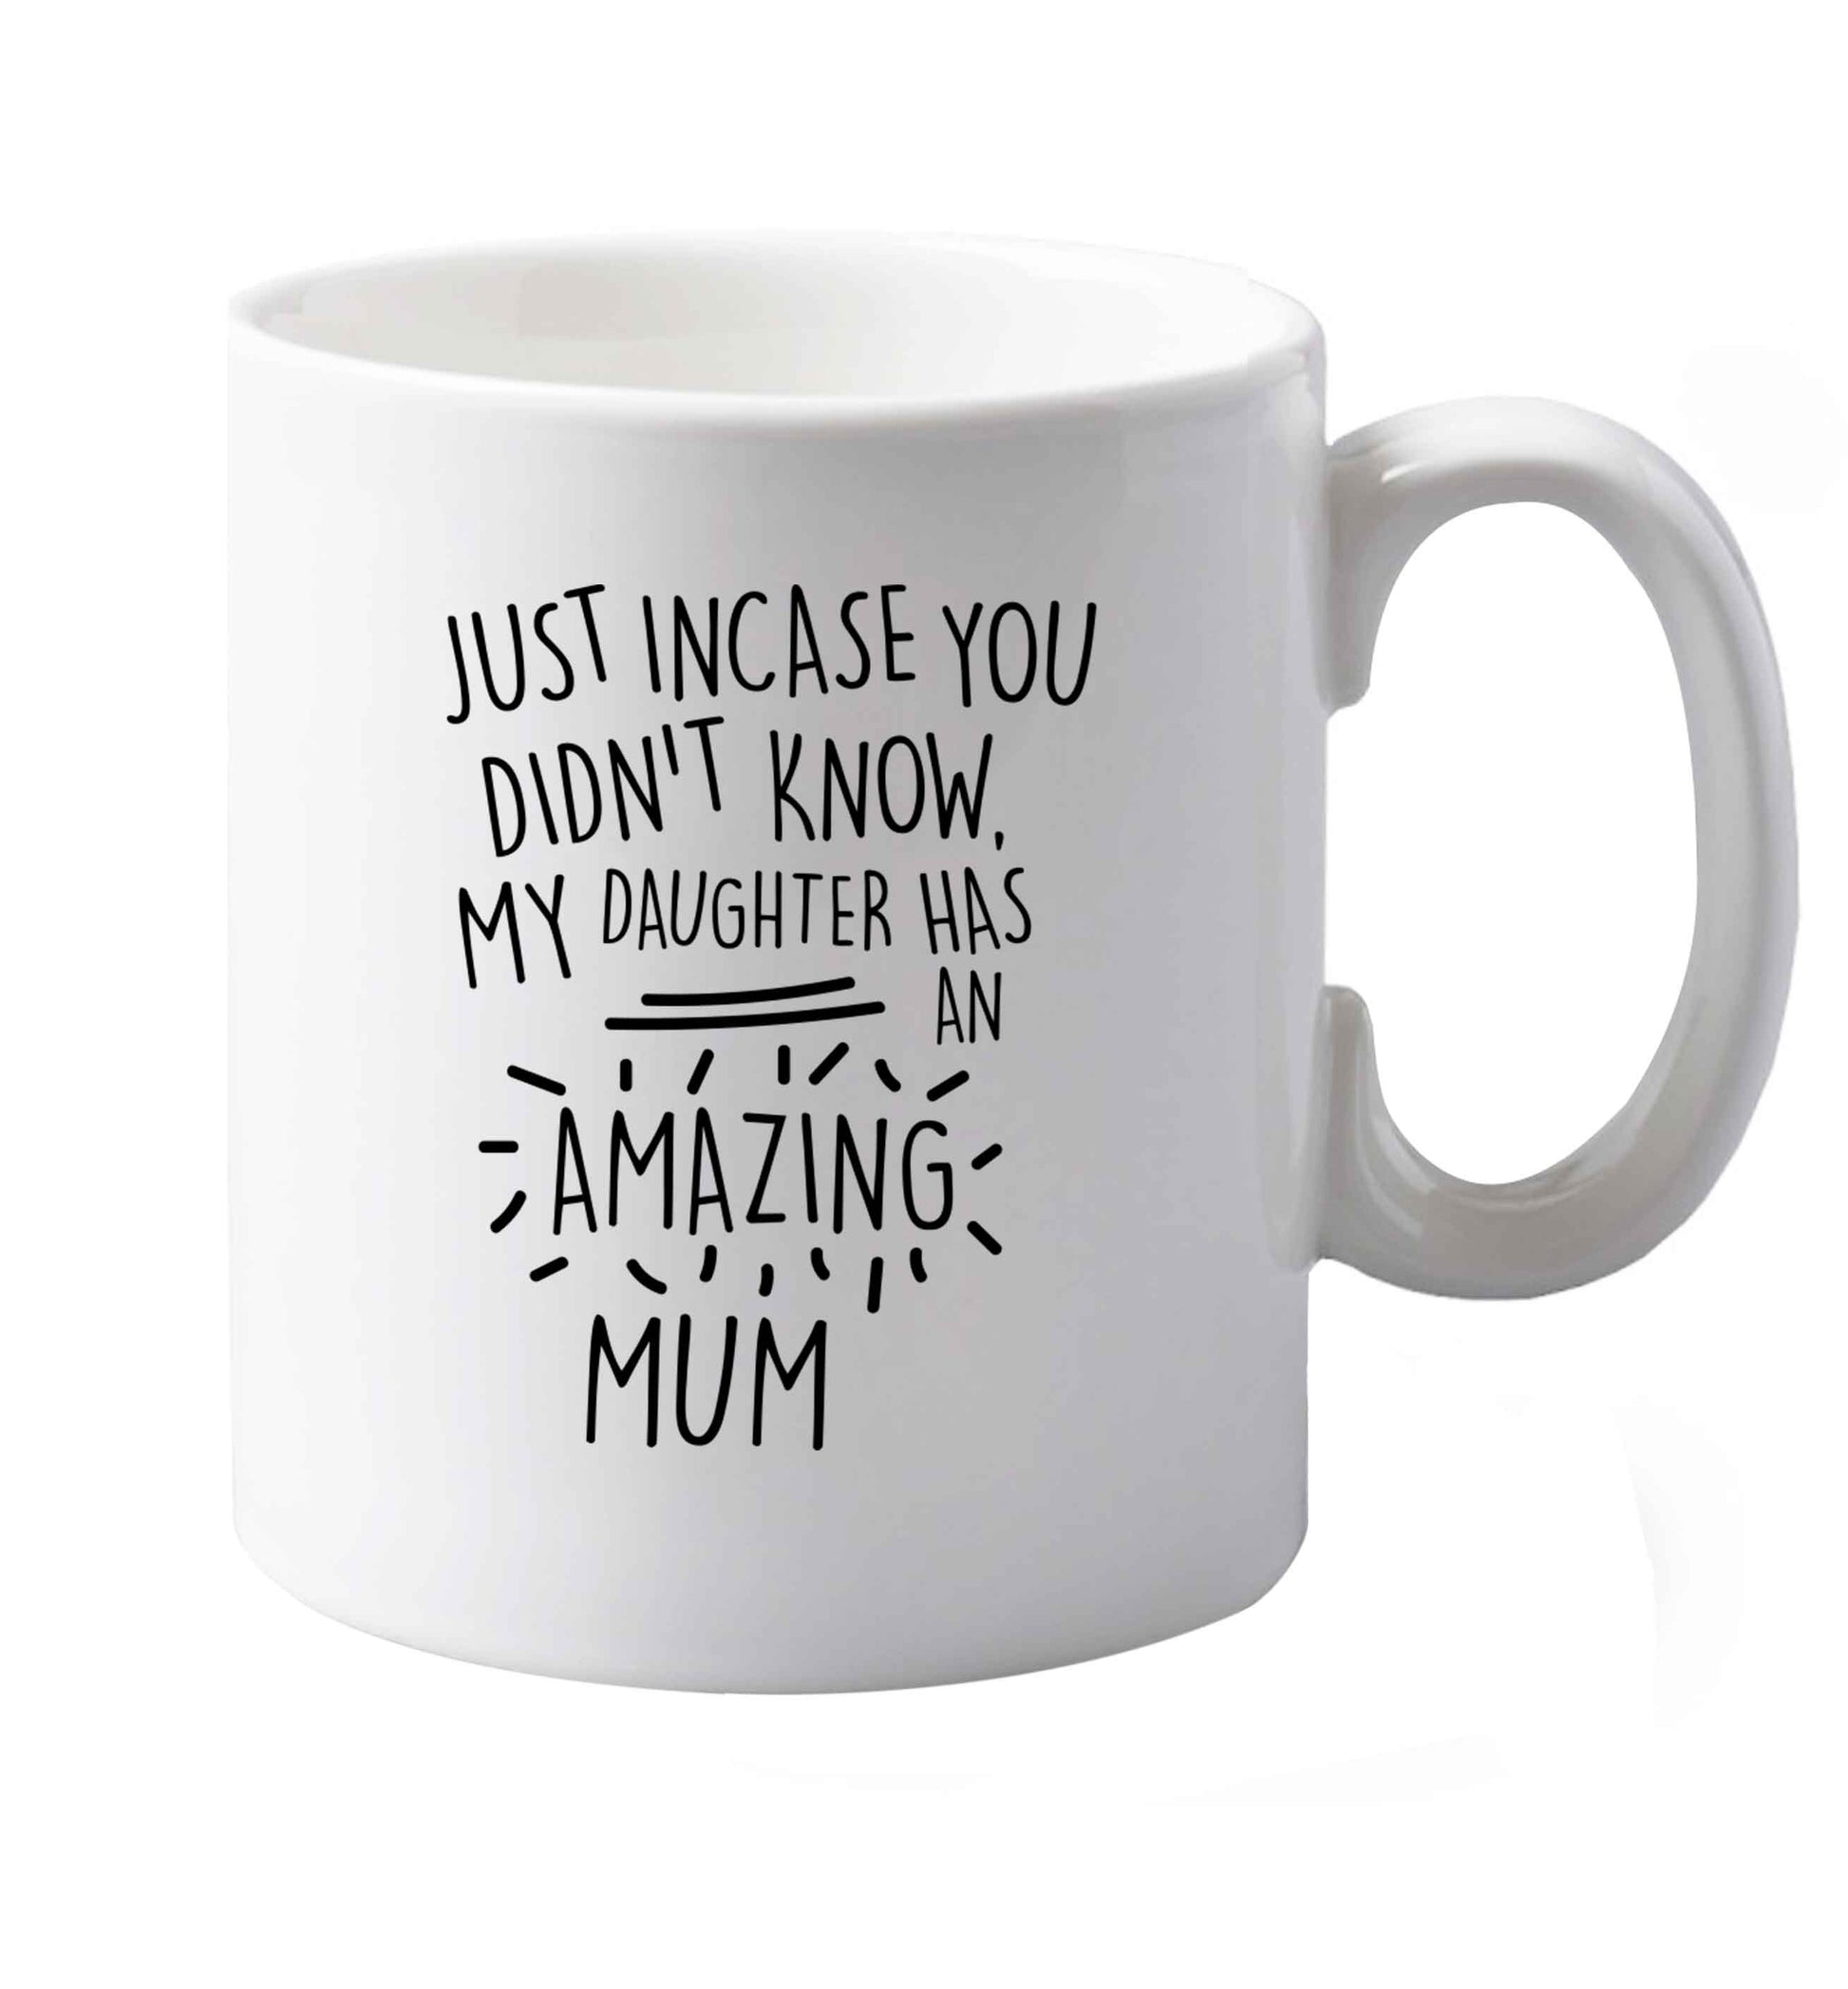 10 oz Just incase you didn't know my daughter has an amazing mum ceramic mug both sides